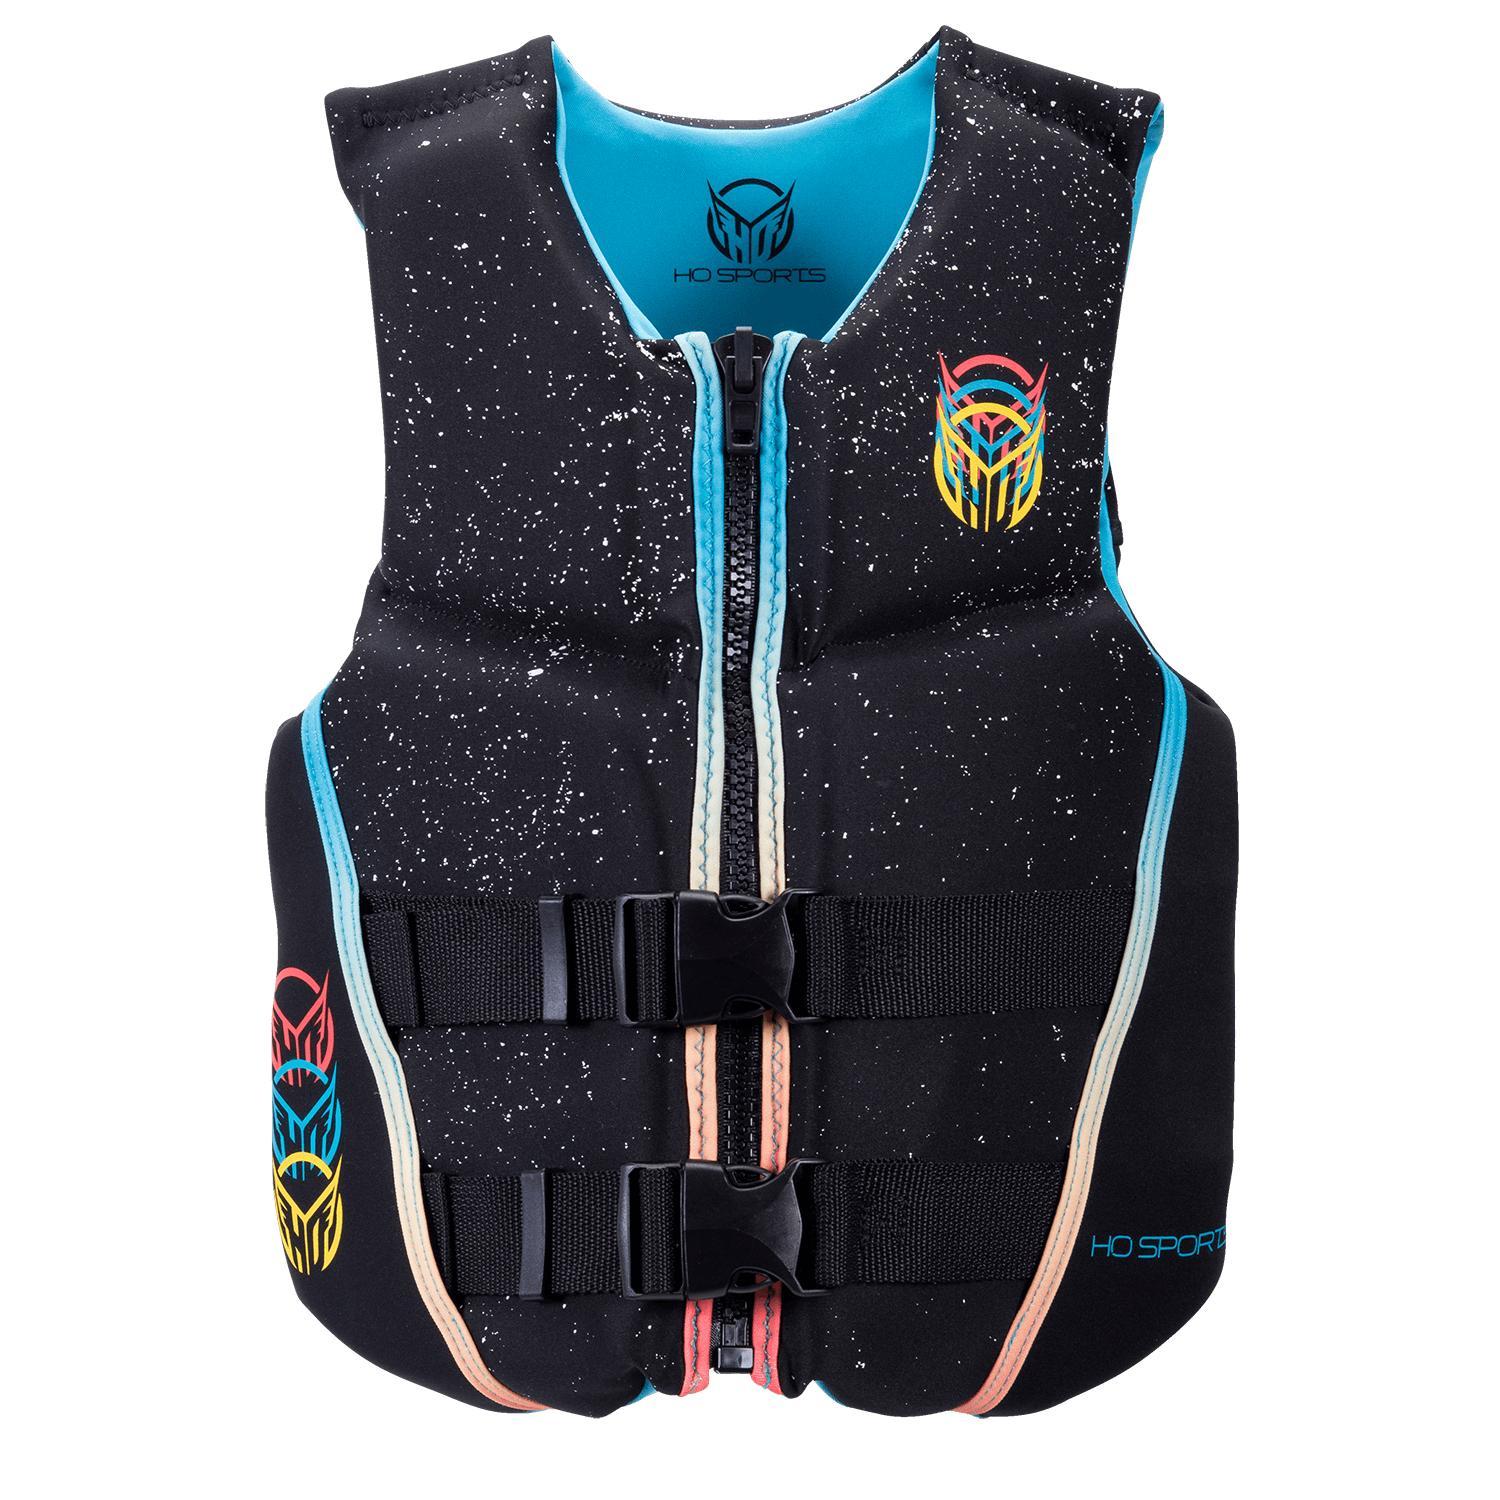 HO Youth Pursuit CGA Kids Wakeboard Vest